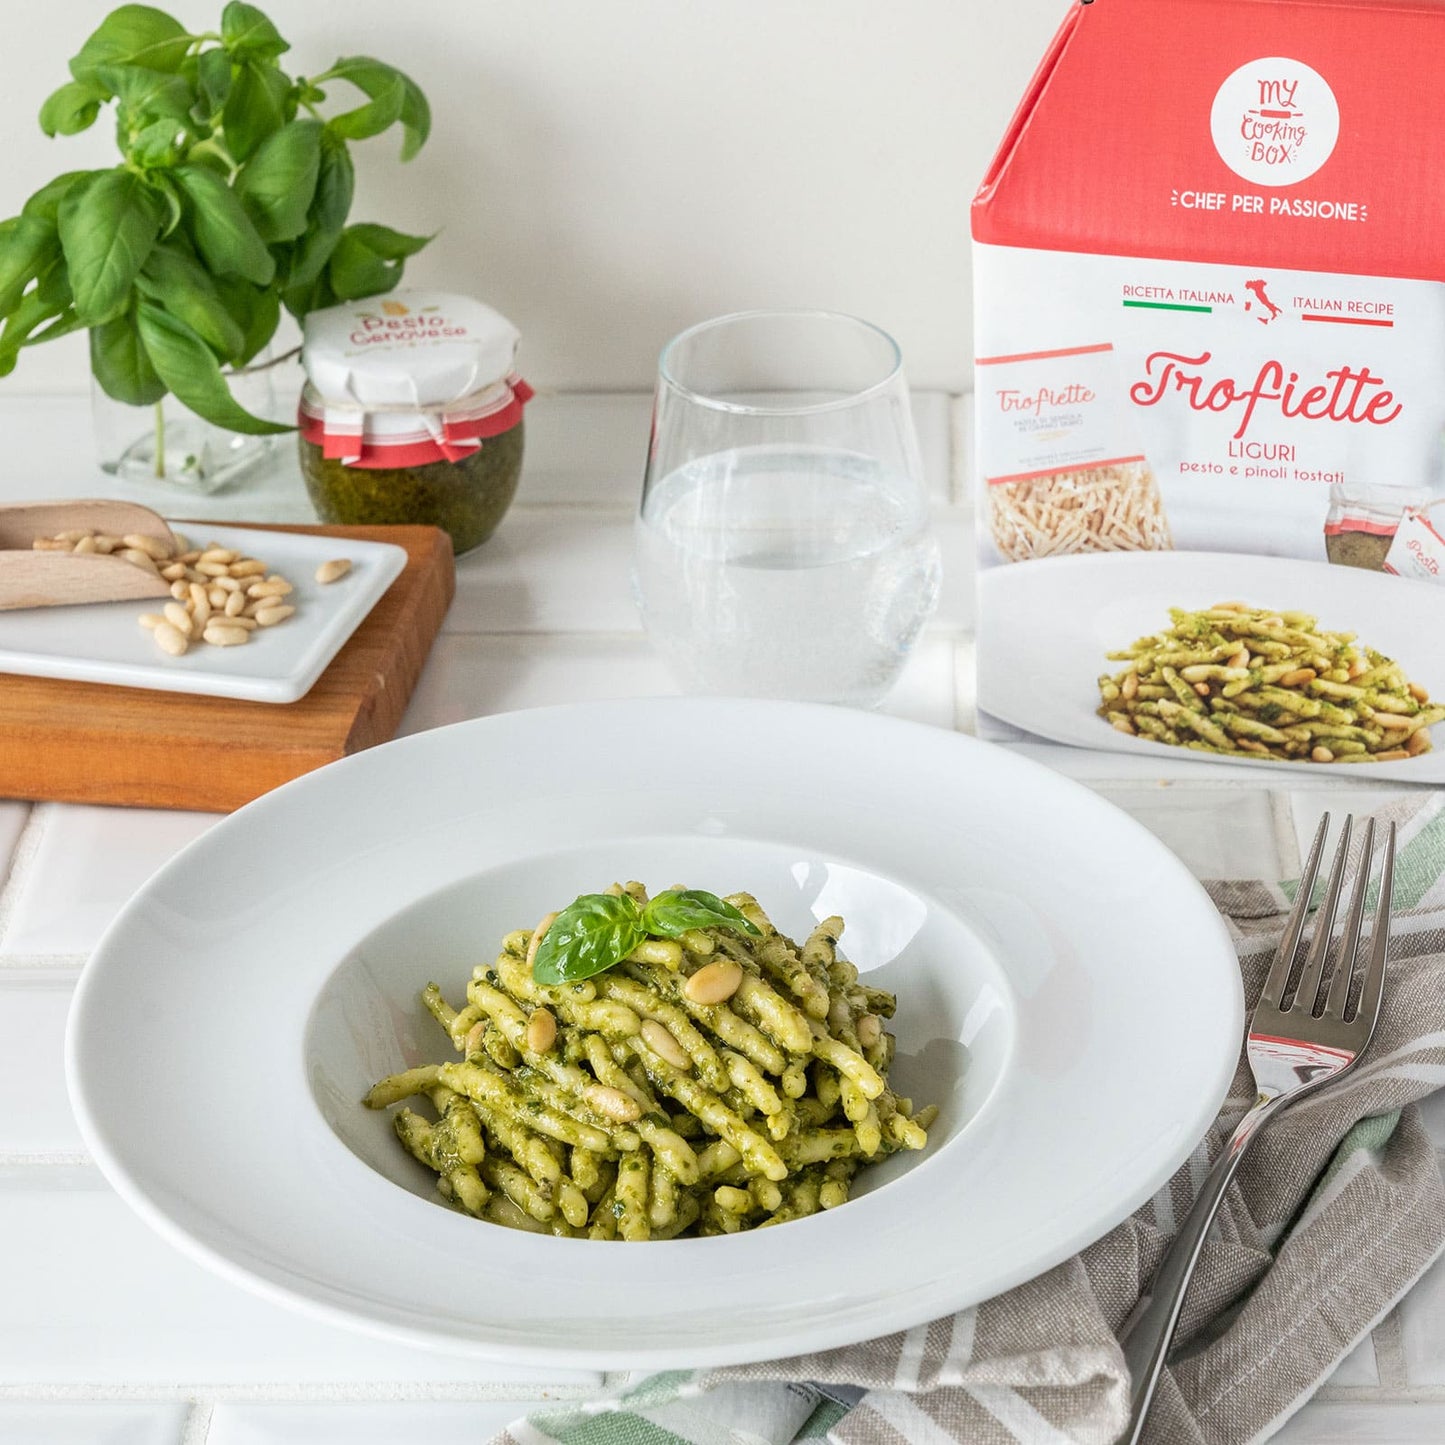 Ligurian trofiette pasta with pesto alla genovese and toasted pine nuts